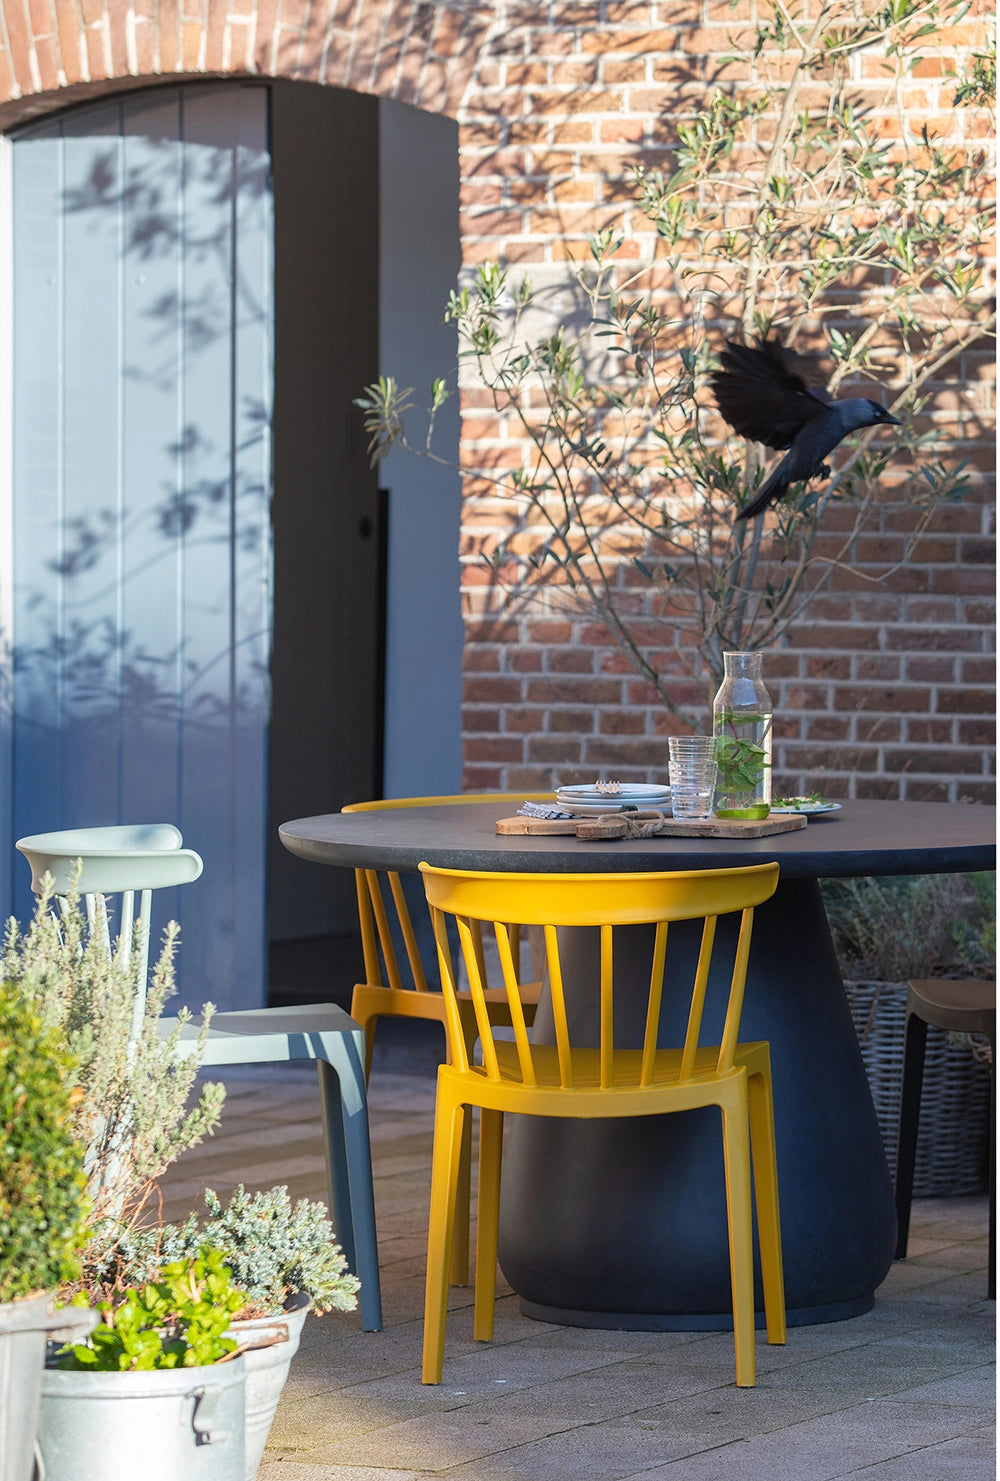 Ash Polypropylene Chair Ochre 5 with Matching Light Green Chair and Black Round Table in Outdoor Setting